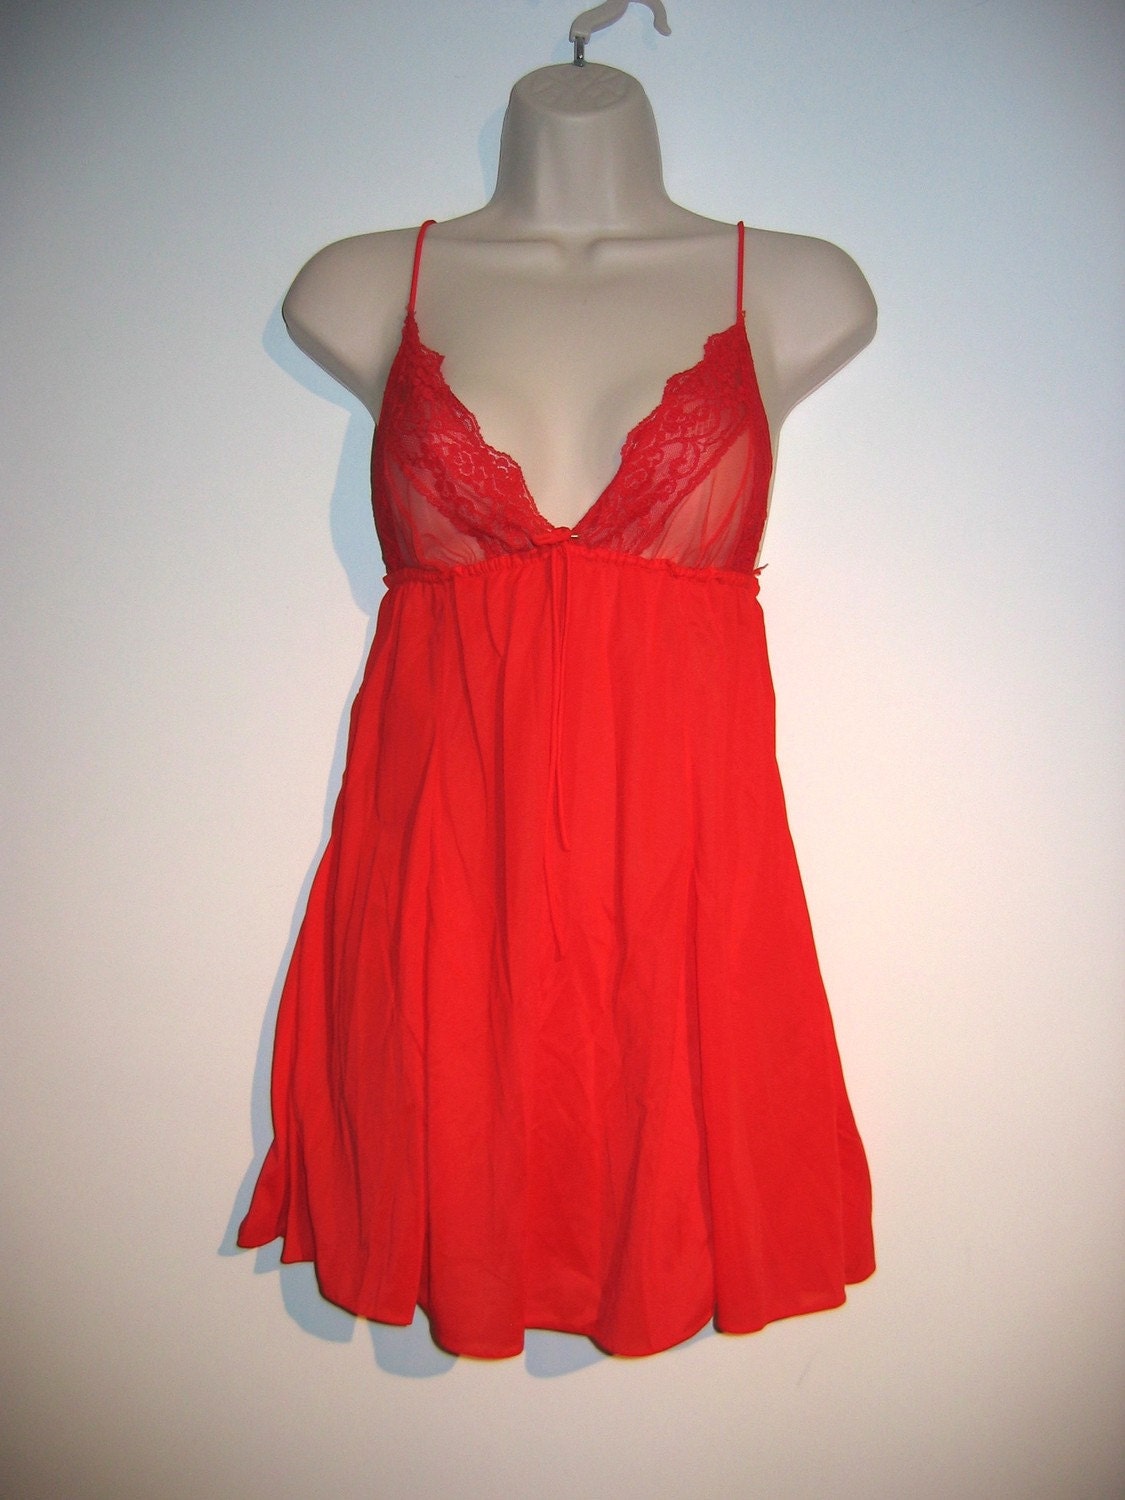 60's Babydoll Nightie and matching Panty. Nightgown. by thegroove